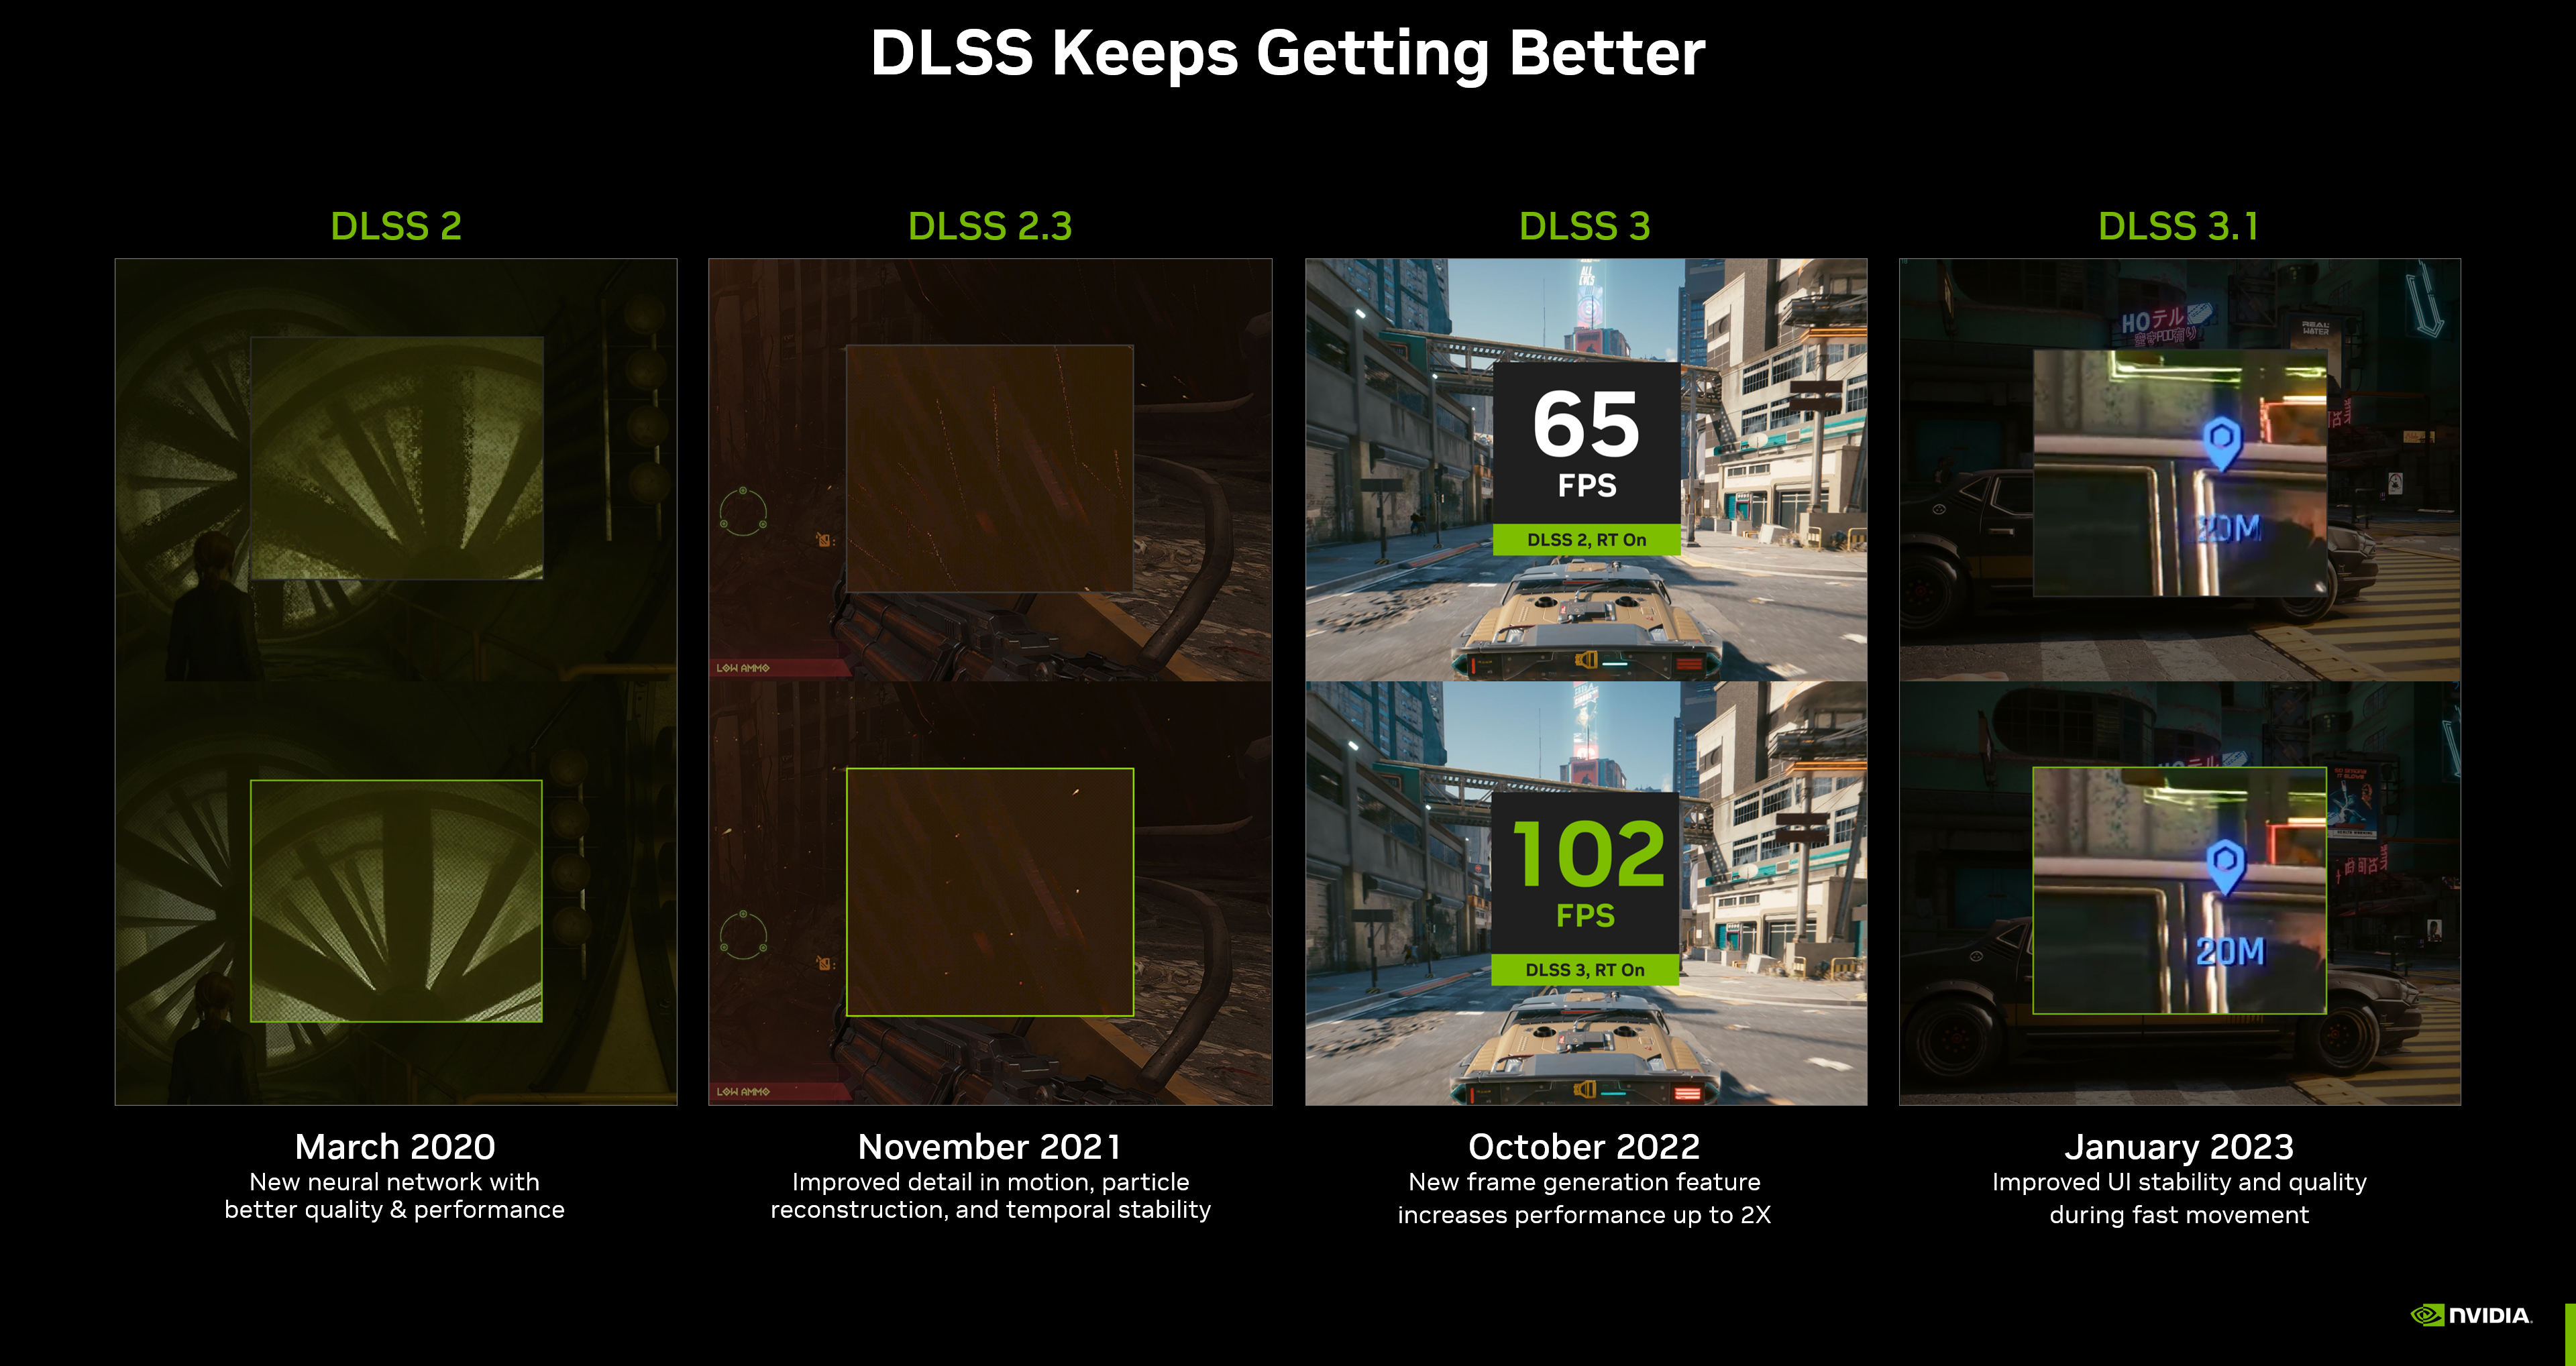 All the ray tracing and DLSS games confirmed so far